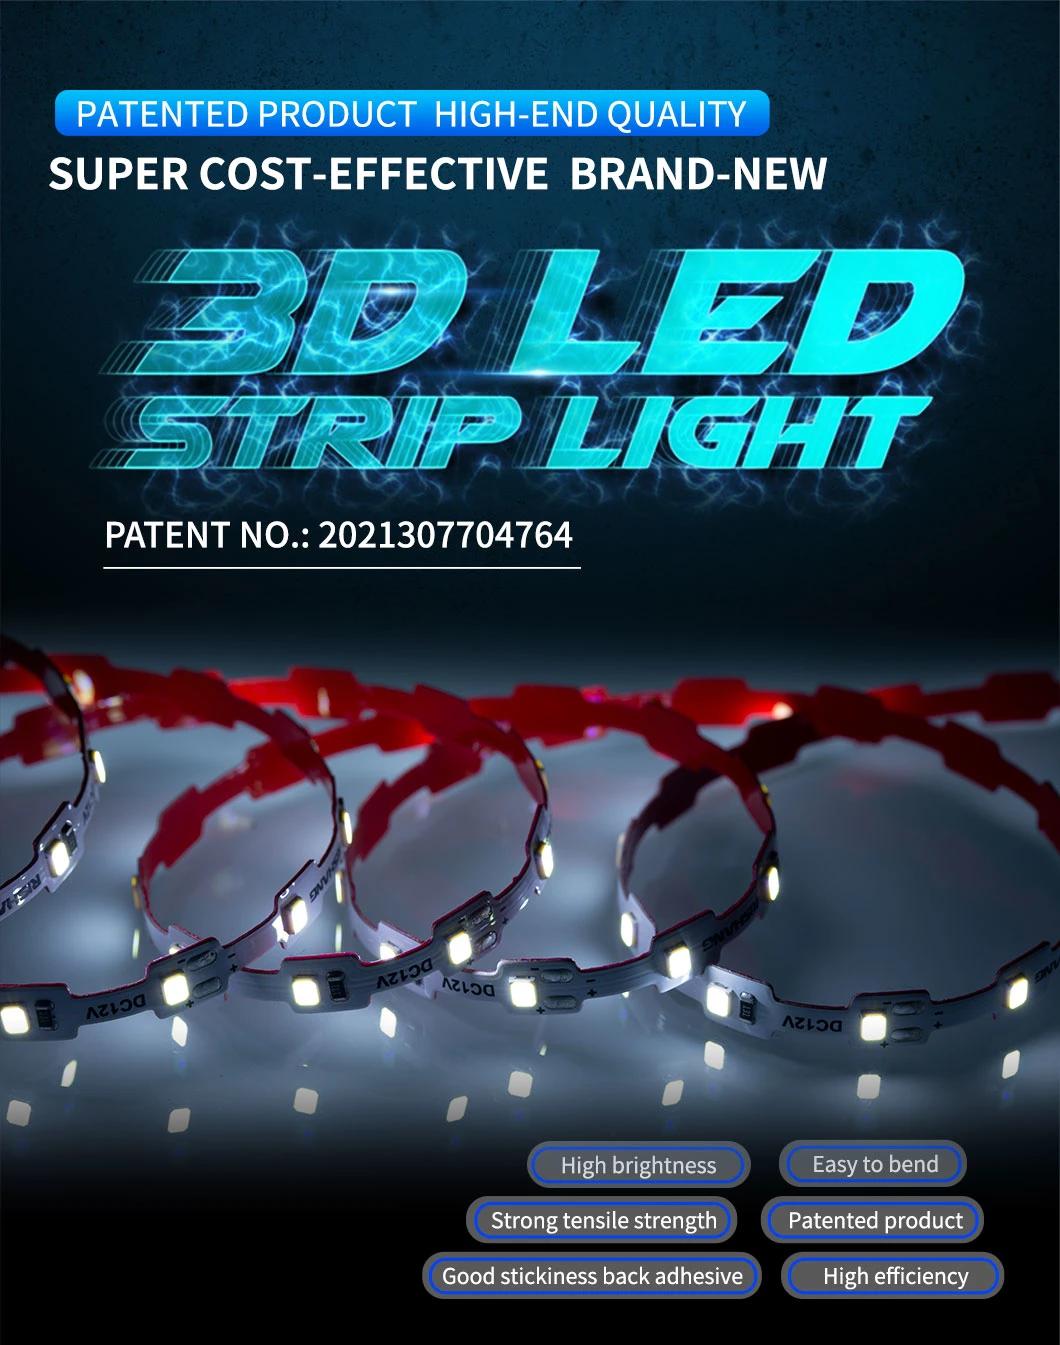 Bendable 3D Dimmable UL CE Certified 12V LED Strip